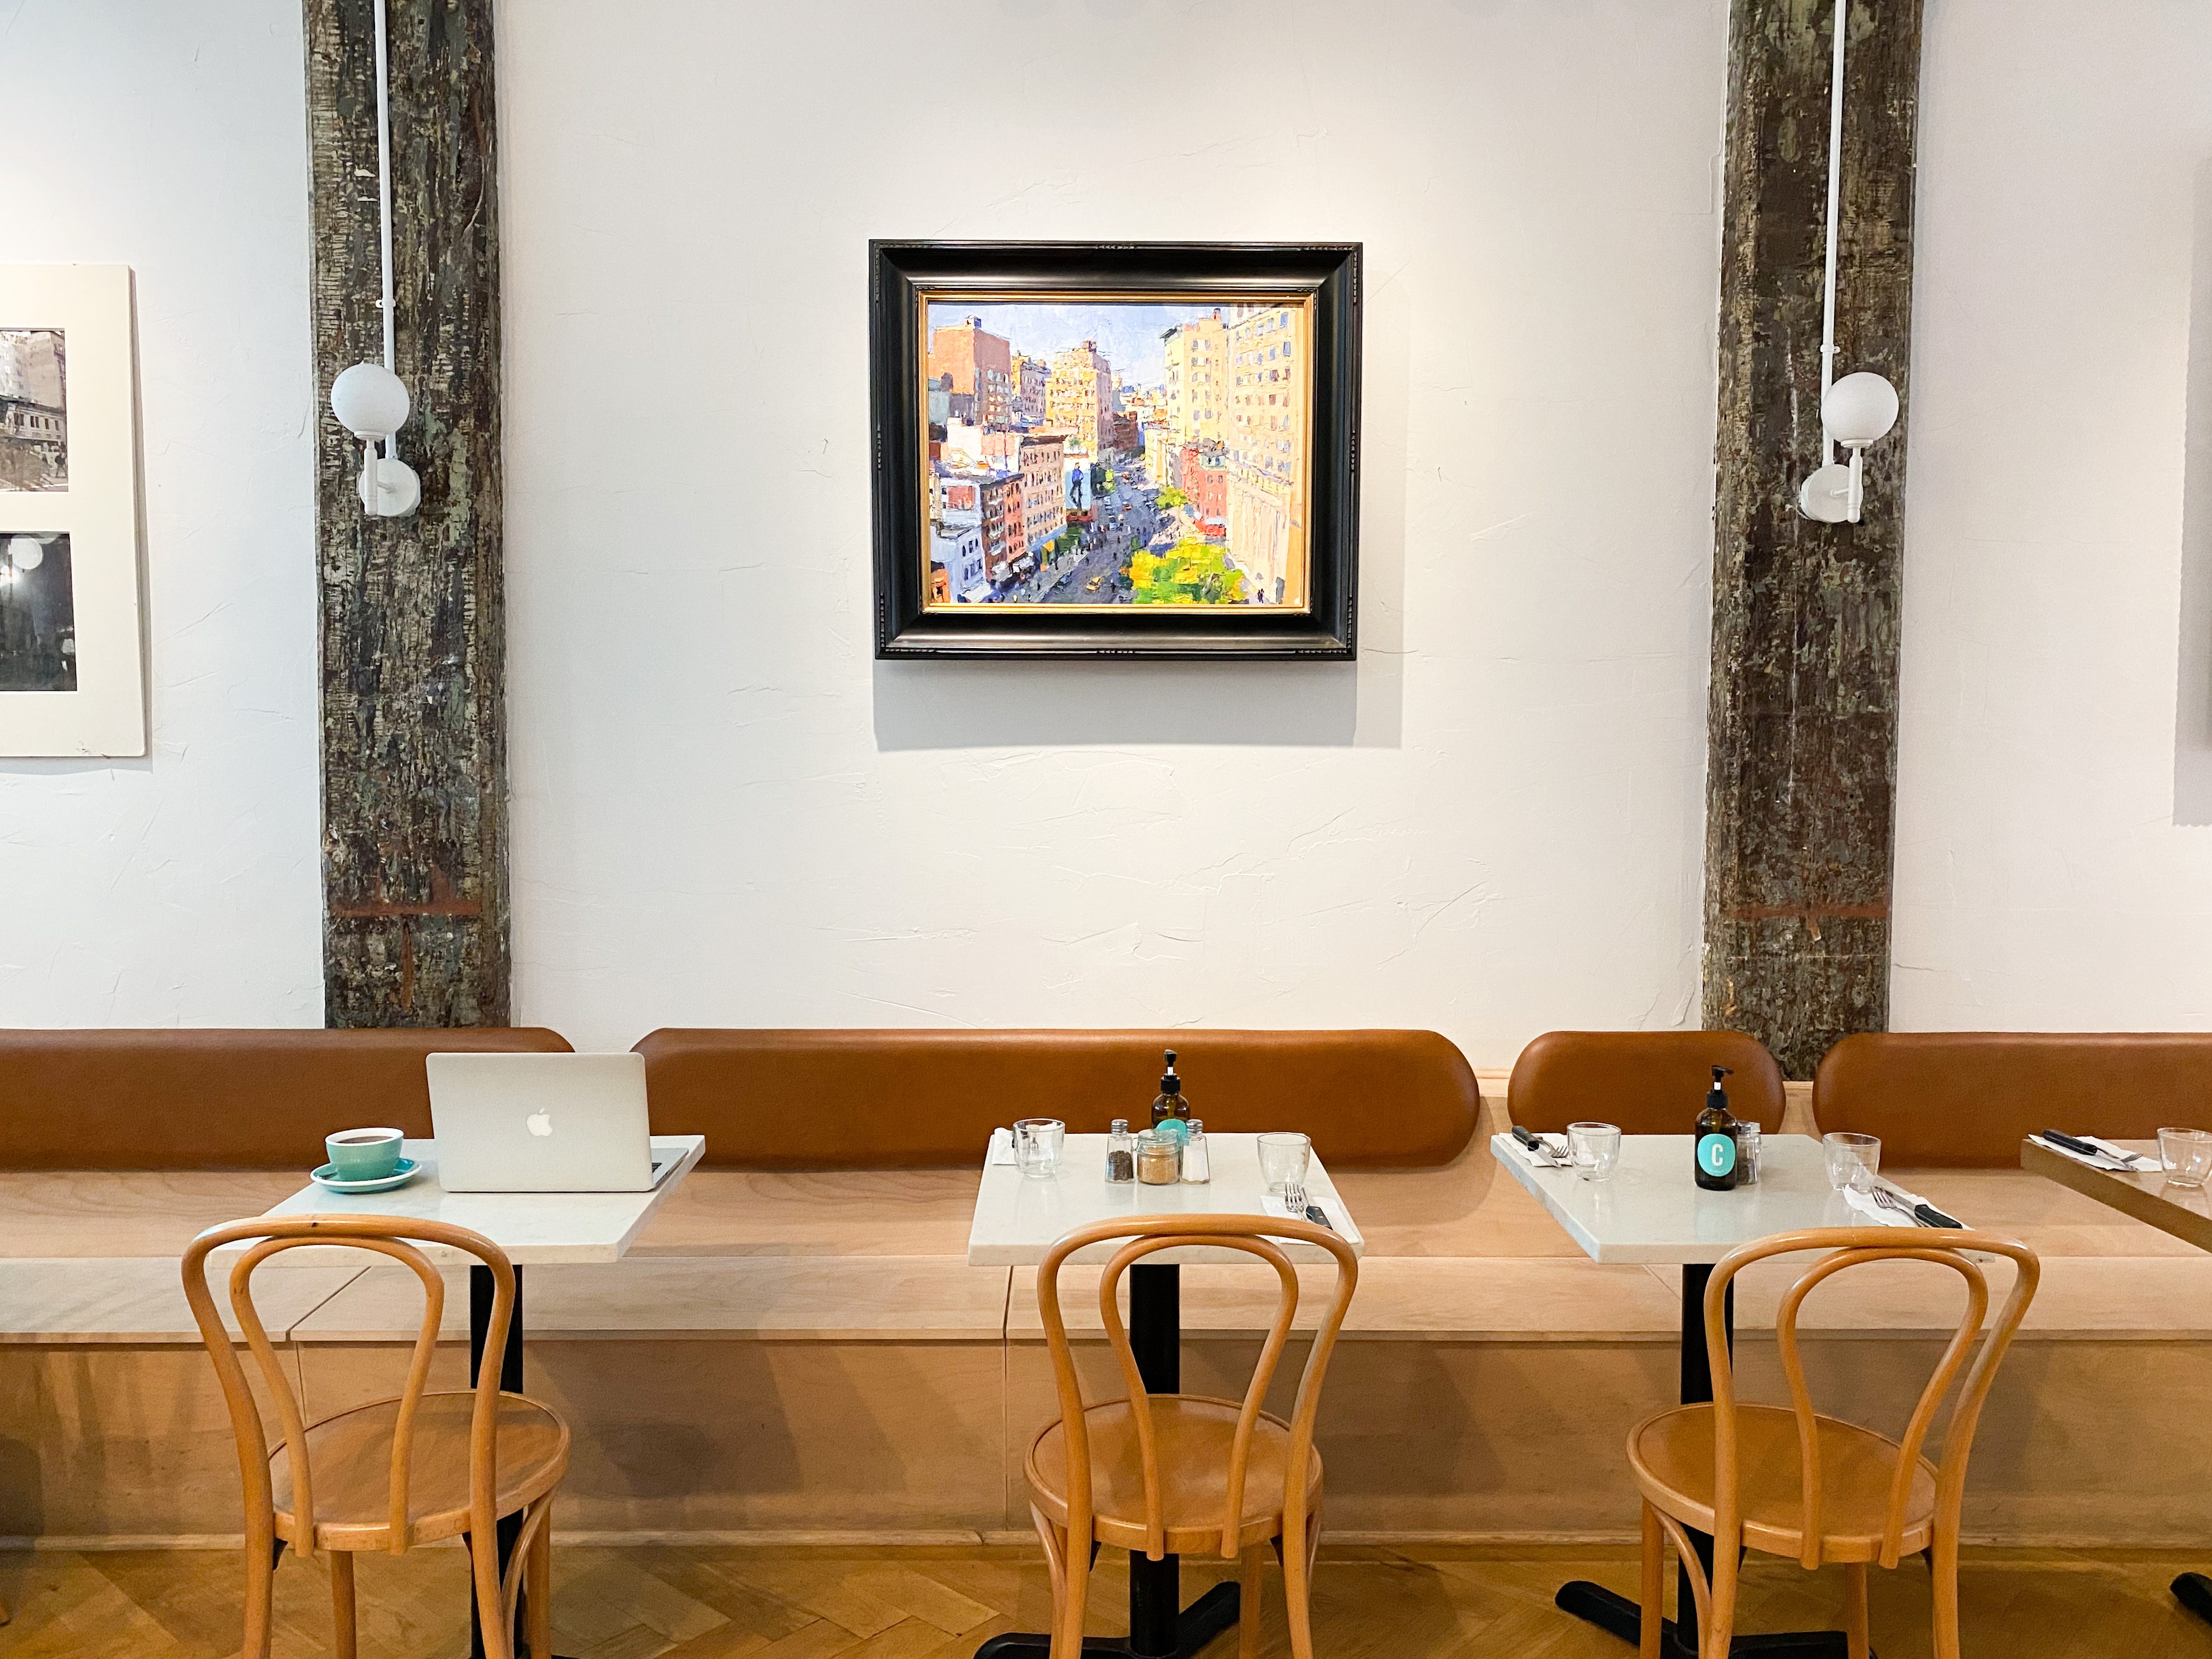 With four locations in Manhattan, <a href="https://citizens.coffee/">Citizens</a>—founded by two Australians—is shaping up to be one of the city’s most beloved spots for digital nomads who have traded their offices for communal workspaces. The SoHo location is a minimalist gem on Lafayette Street, with long tables and banquettes set underneath locally-painted art.<p>Sign up for our newsletter to get the latest in design, decorating, celebrity style, shopping, and more.</p><a href="https://www.architecturaldigest.com/newsletter/subscribe?sourceCode=msnsend">Sign Up Now</a>